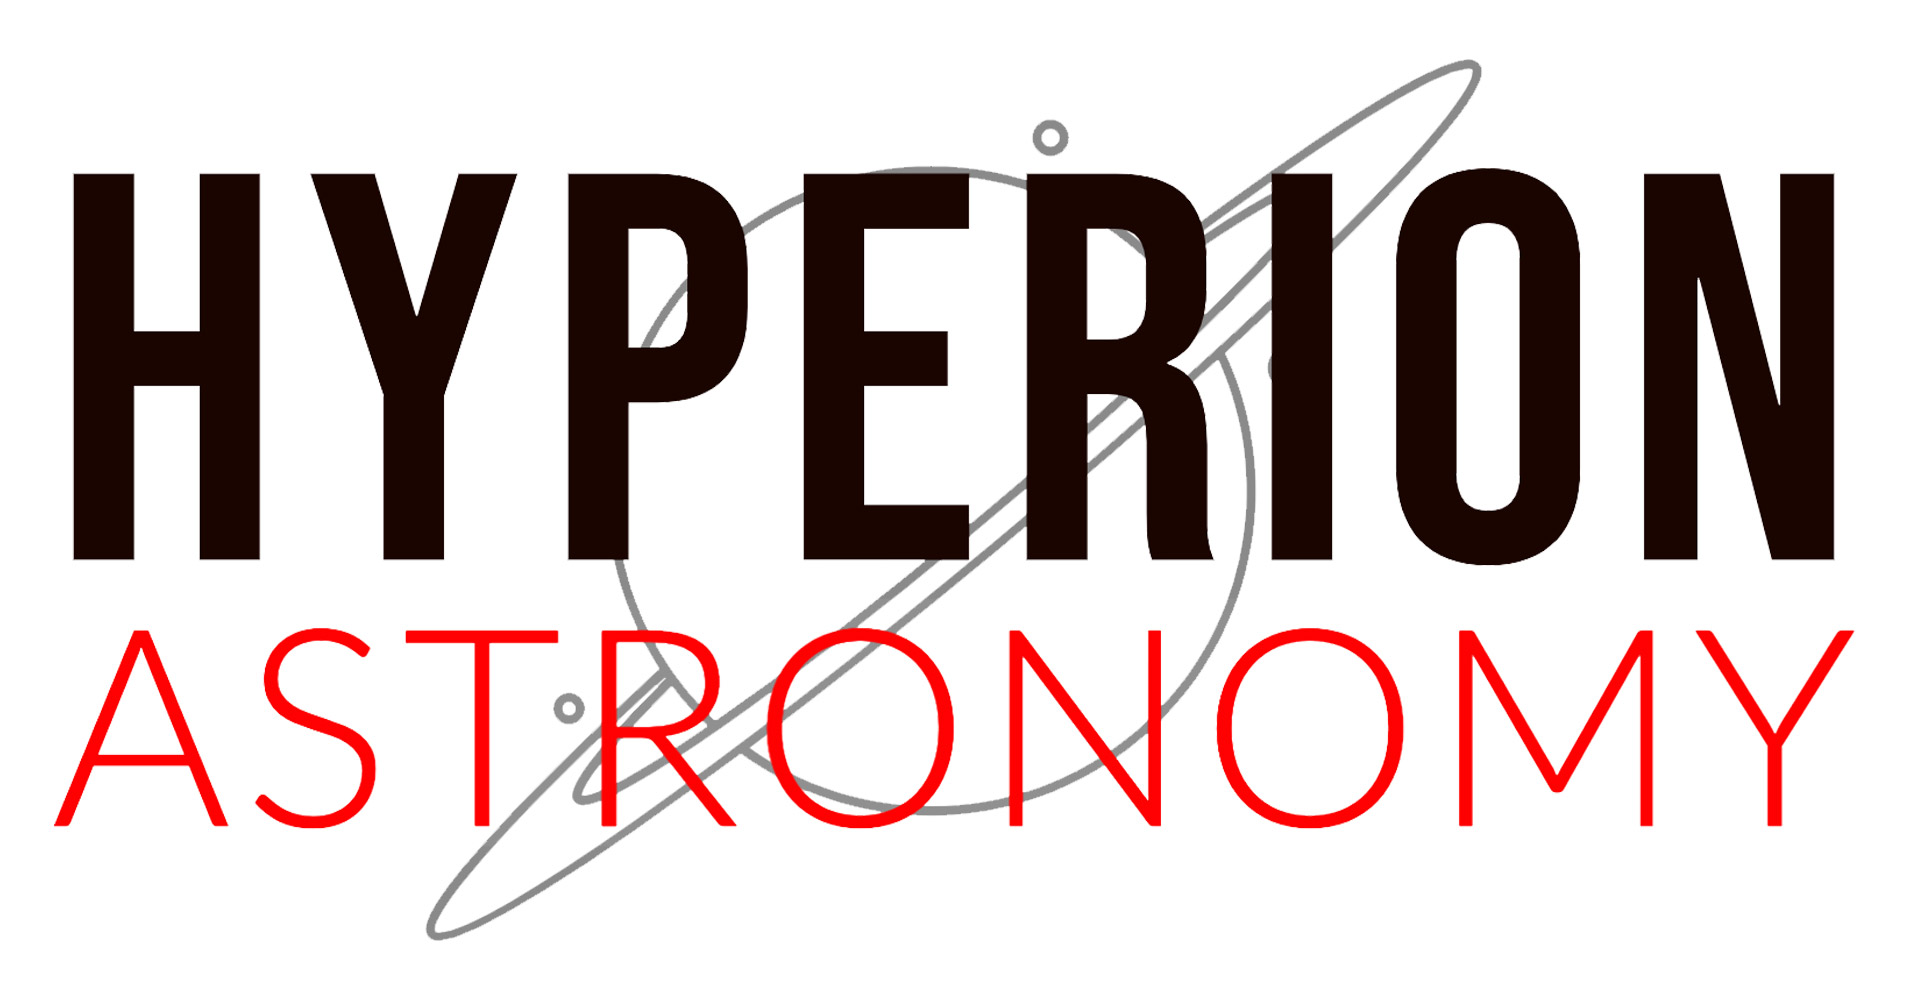 Hyperion Astronomy